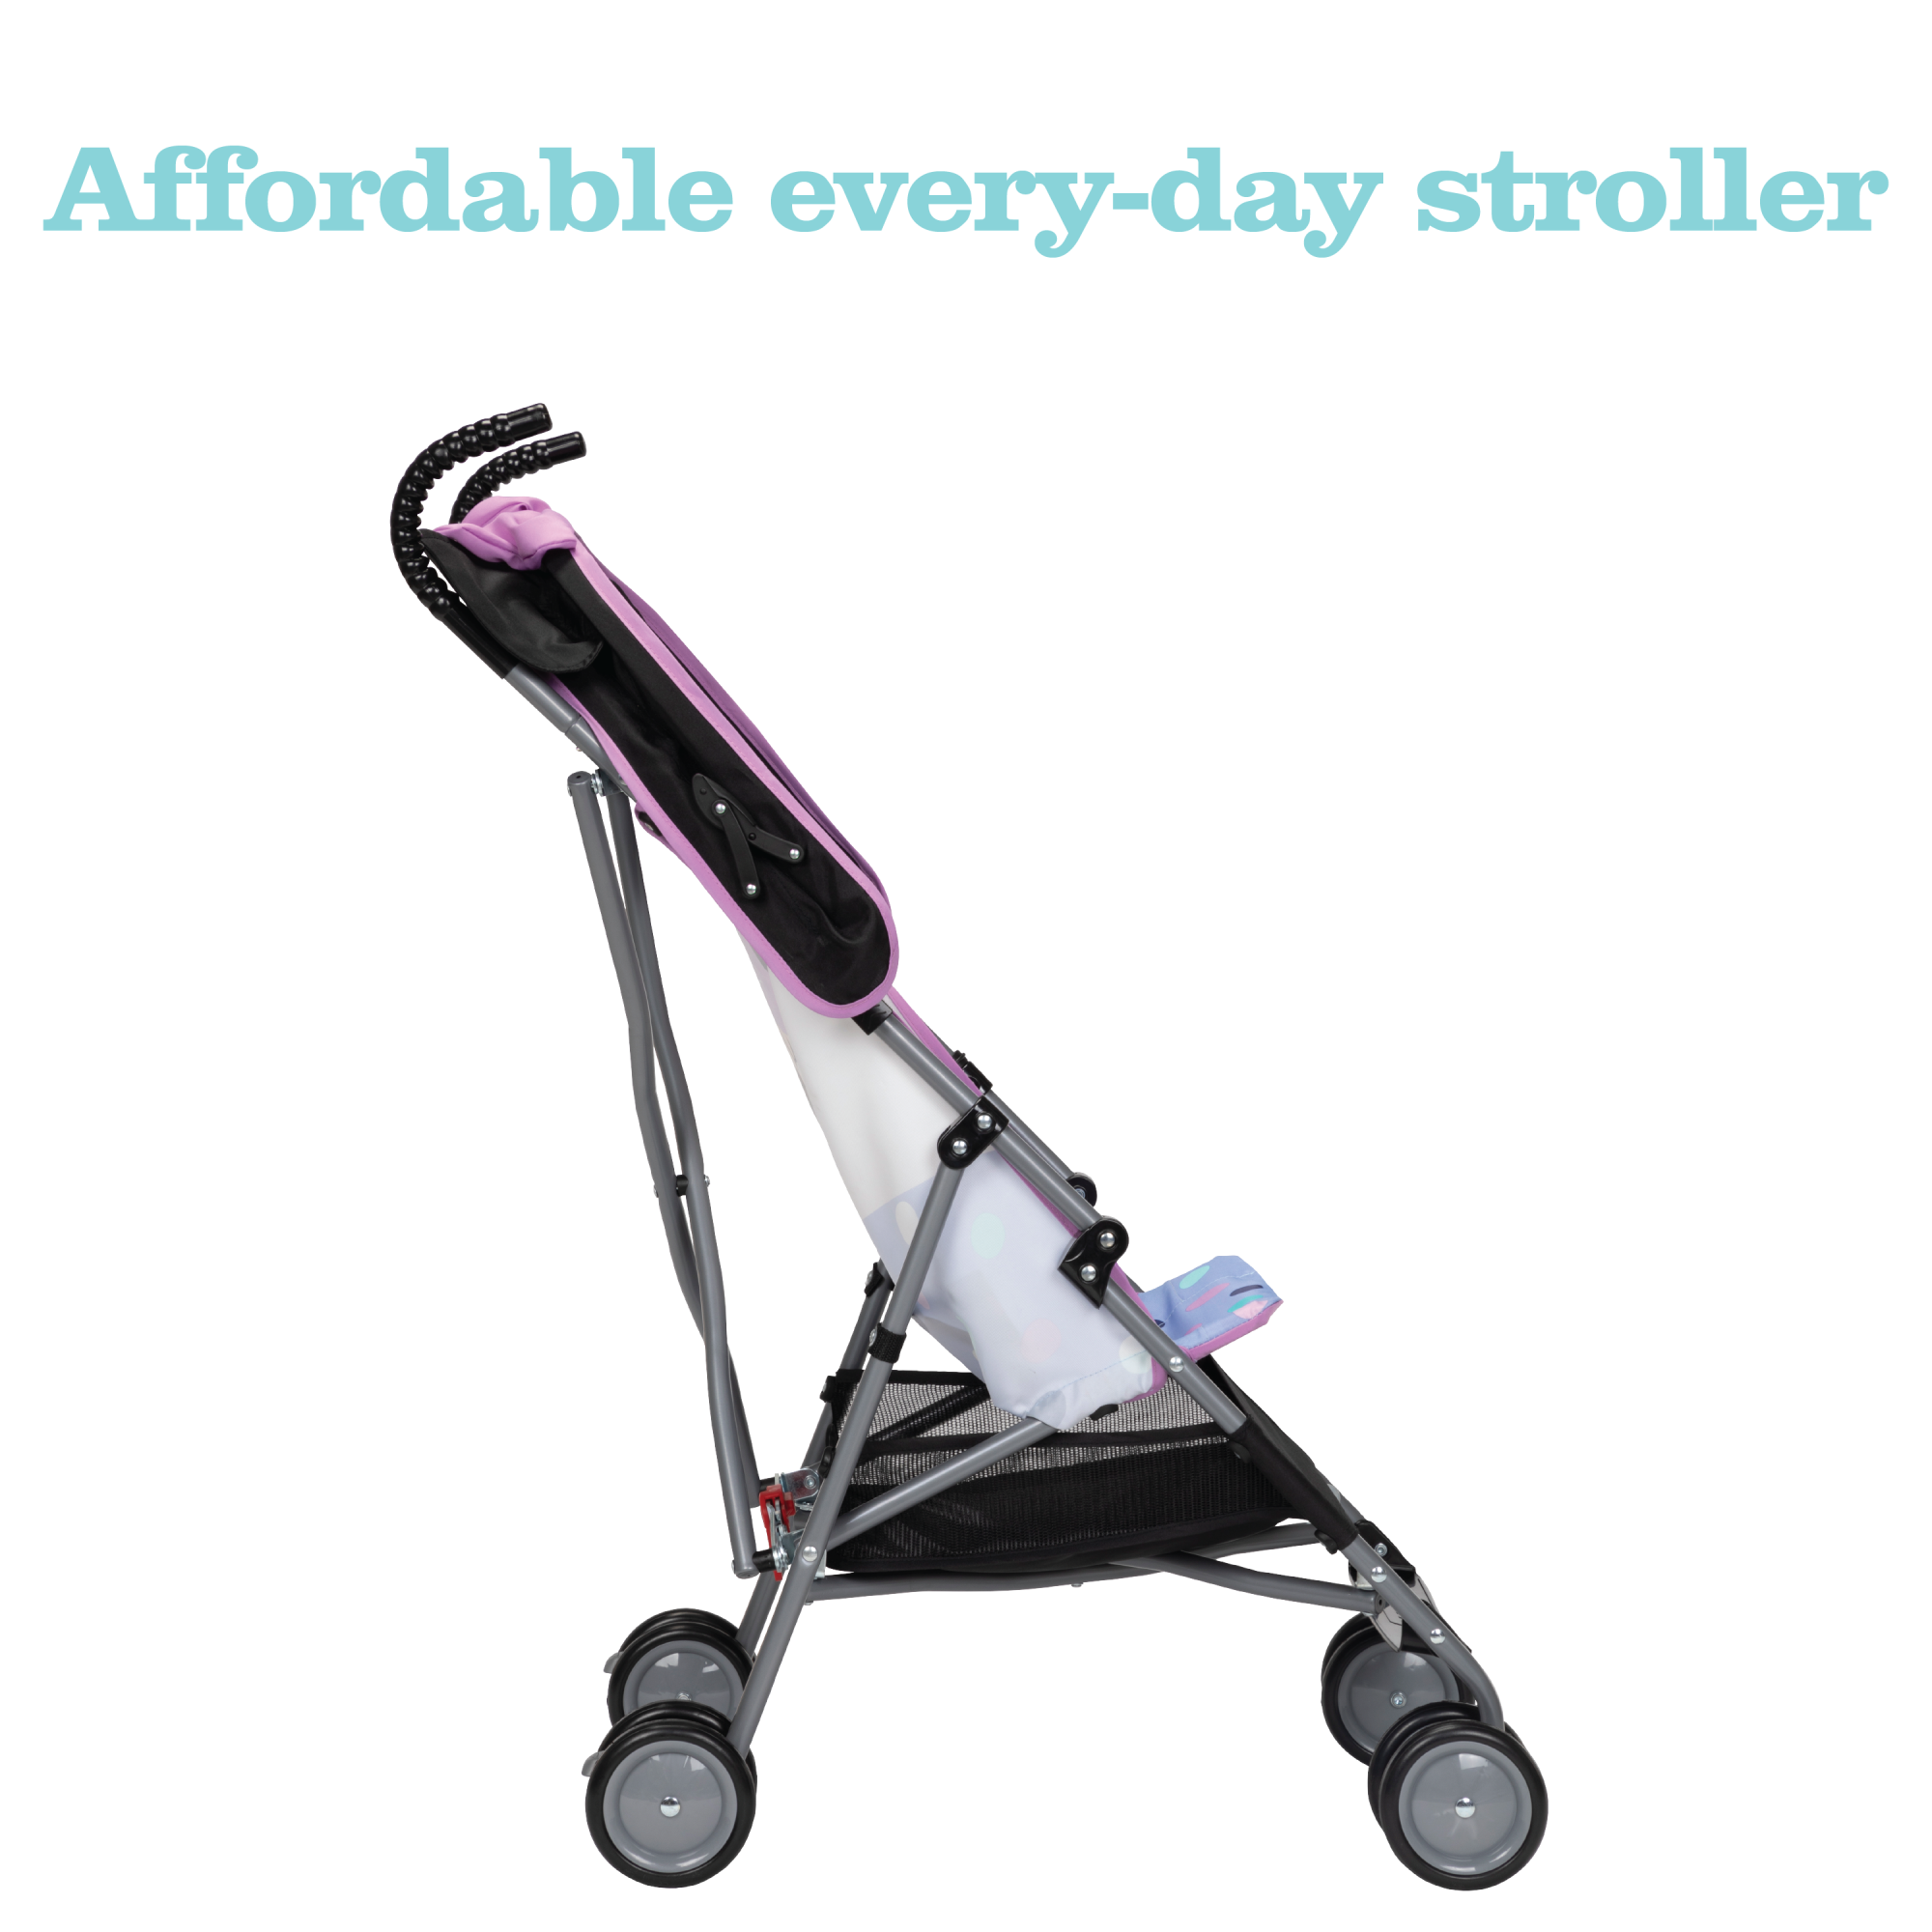 Disney Baby Character Umbrella Stroller - canopy provides shade and features Mickey or Minnie